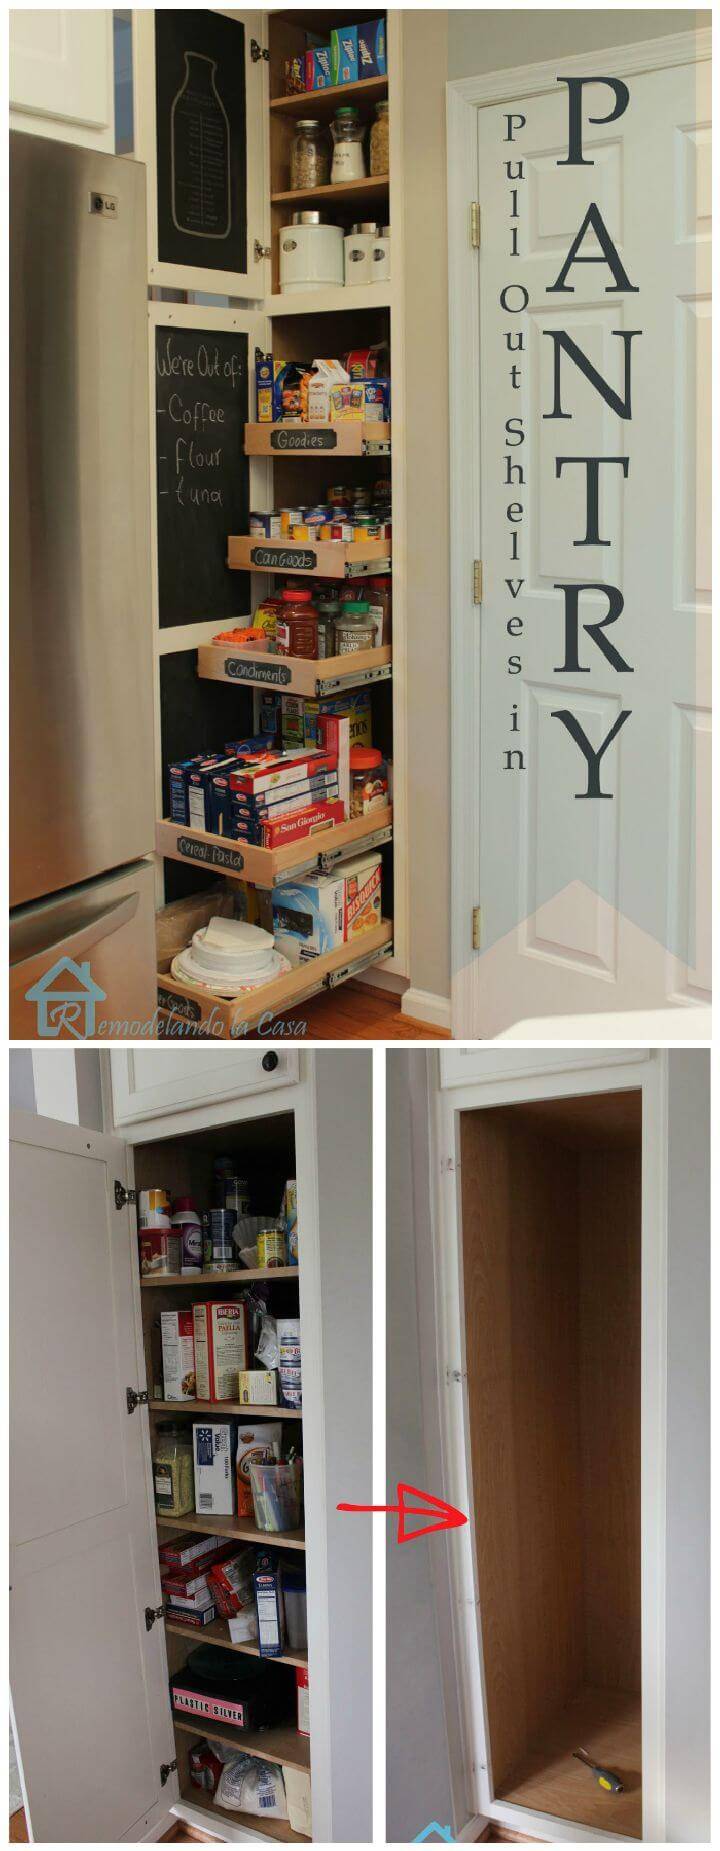 Pull out shelves in pantry